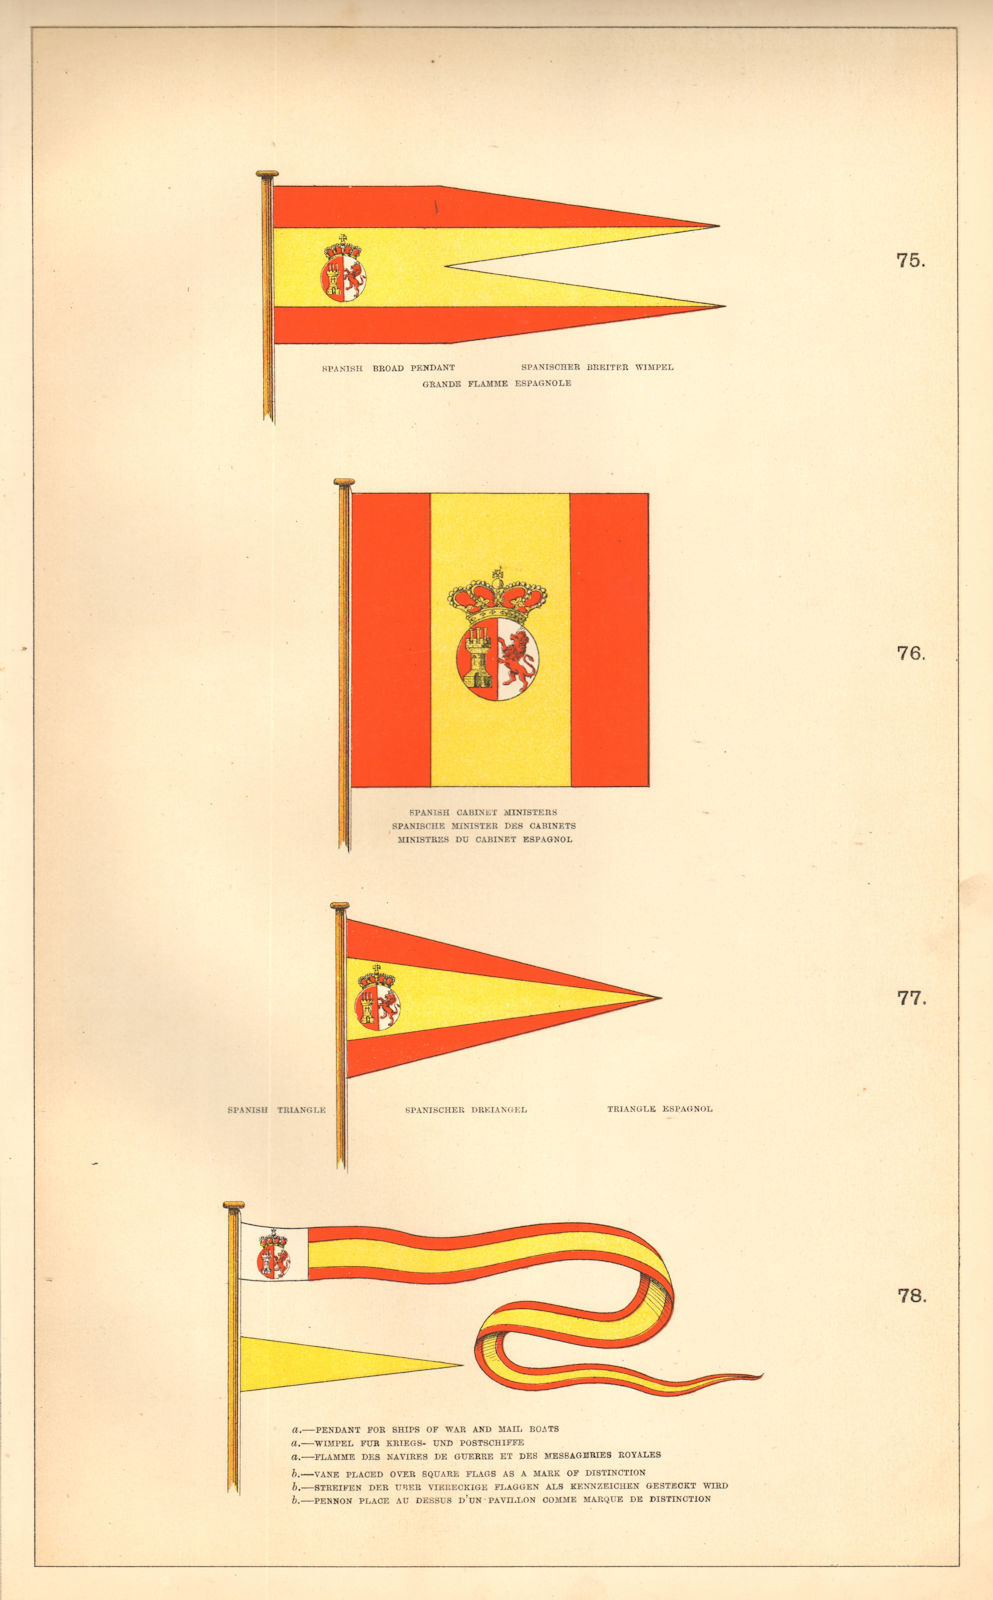 SPANISH STATE/MARITIME FLAGS. Broad pennant Cabinet Ministers Triangle Mail 1873